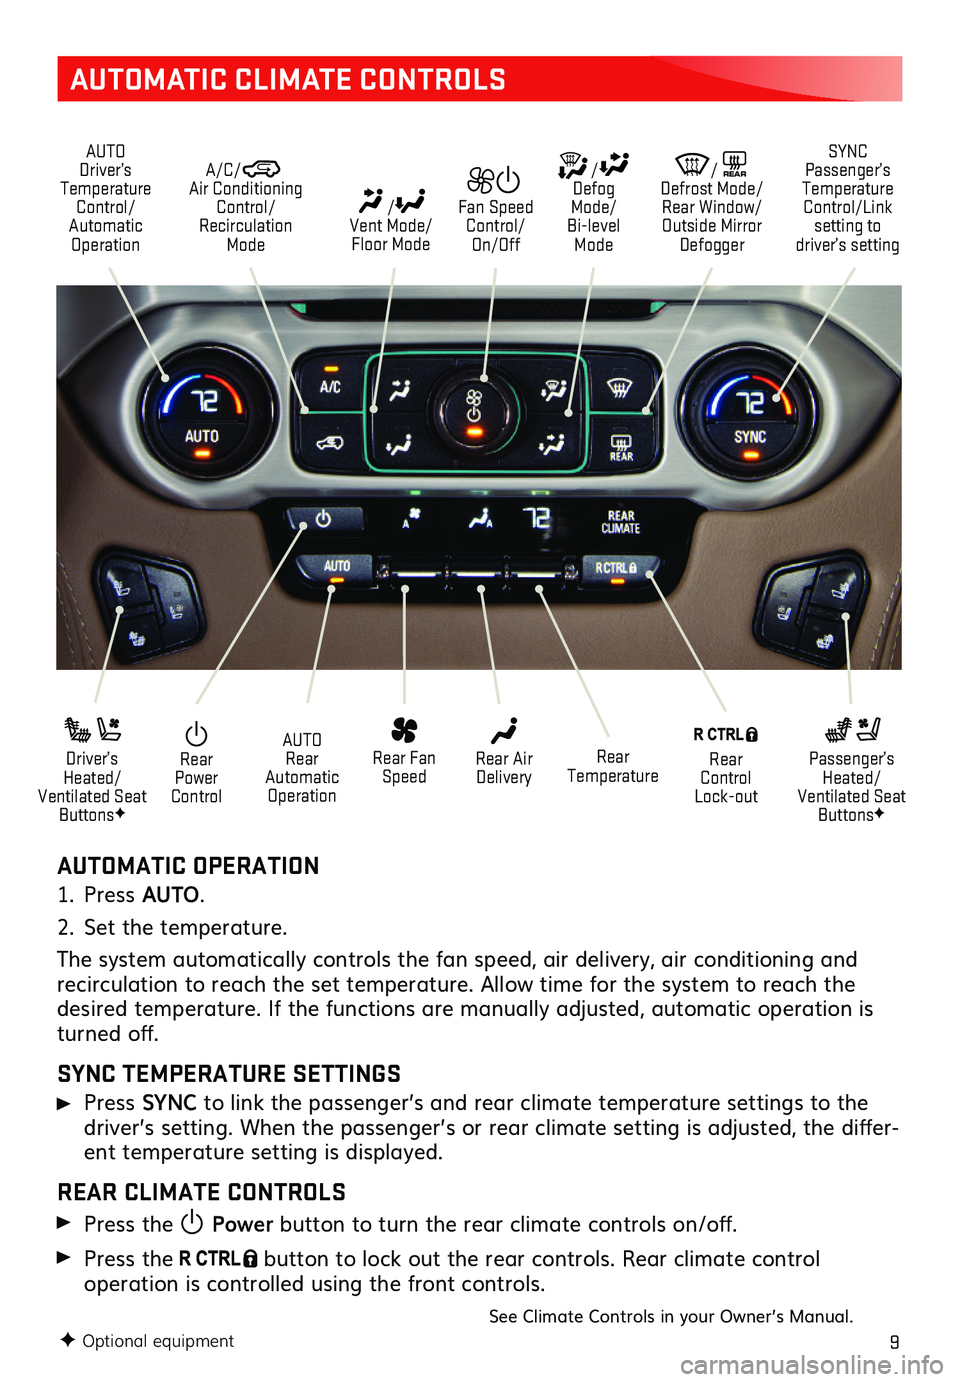 GMC YUKON 2020  Get To Know Guide 9
AUTOMATIC CLIMATE CONTROLS
AUTOMATIC OPERATION
1. Press AUTO.
2. Set the temperature. 
The system automatically   controls the fan speed, air delivery, air   conditioning and recirculation to reach 